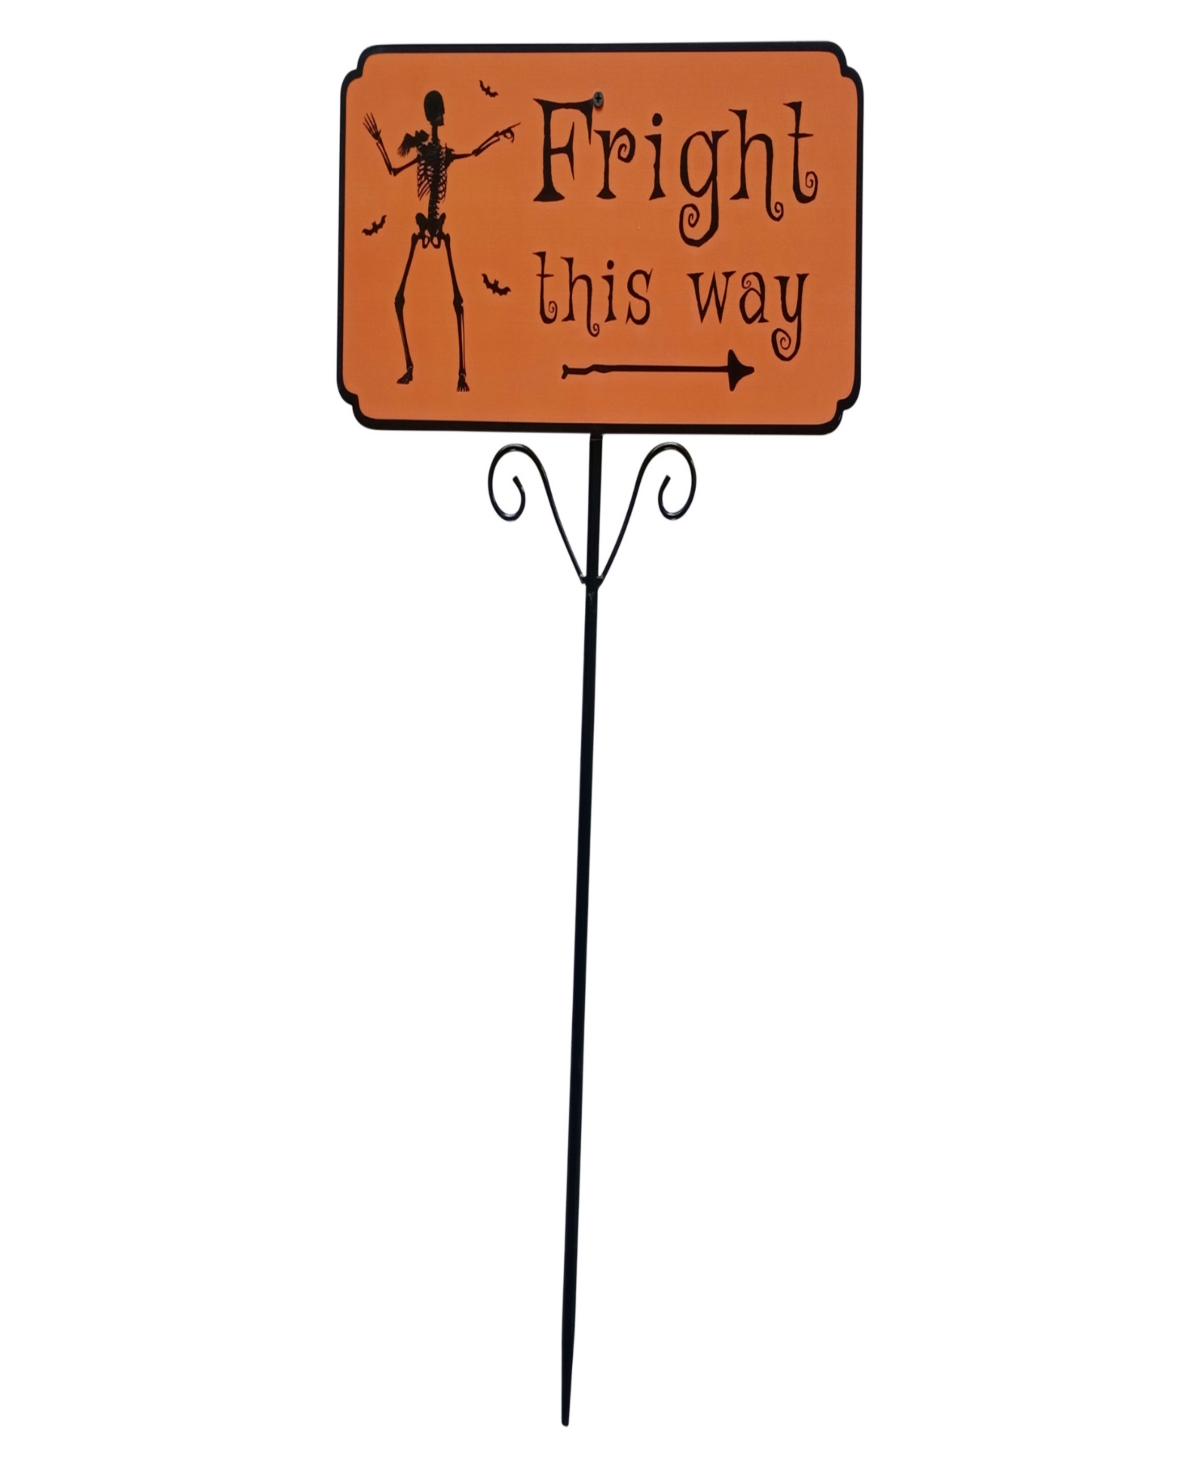 Northlight 27.5" Fright This Way Outdoor Halloween Lawn Stake In Orange